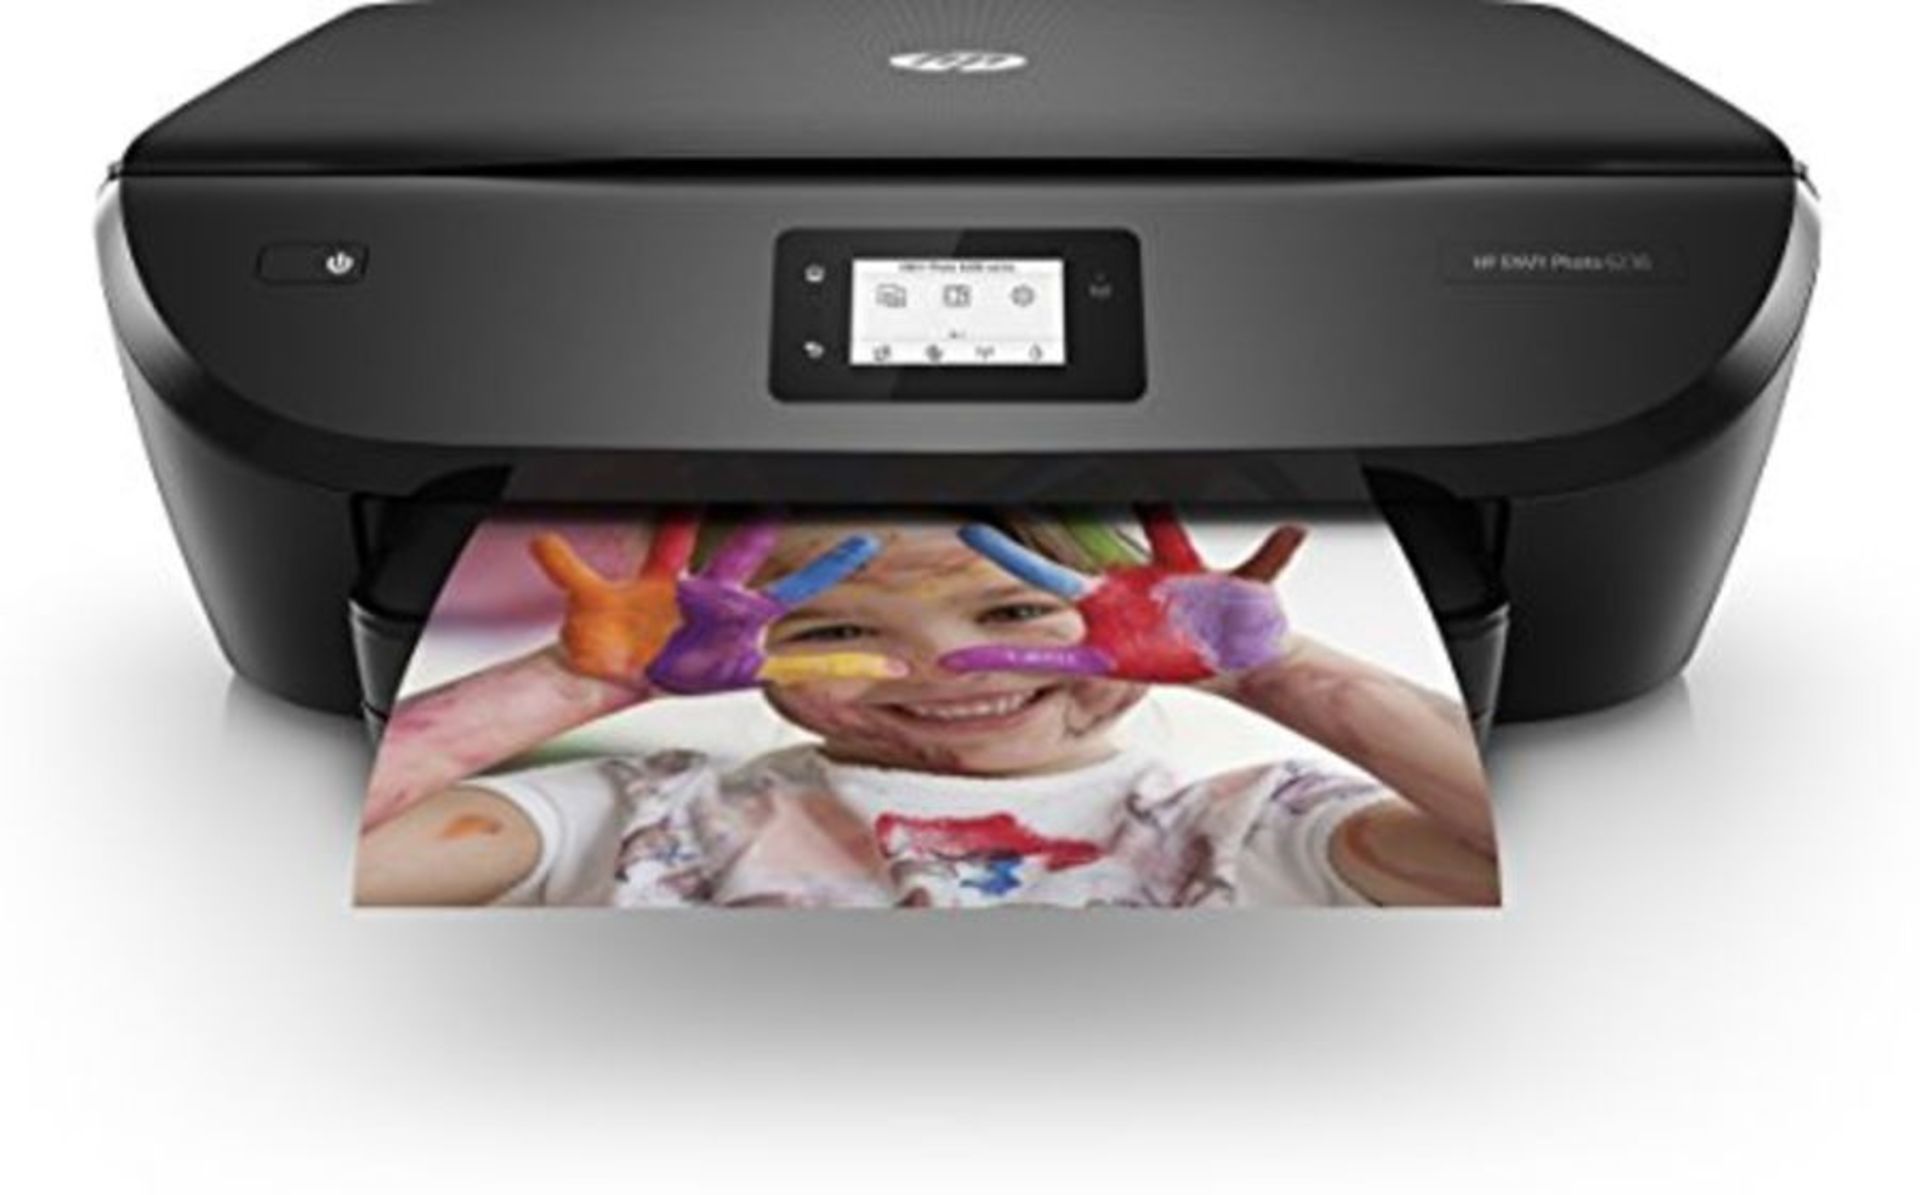 RRP £80.00 HP Envy Photo 6230 All-in-One Wi-Fi Photo Printer with 4 Months of Instant Ink Include